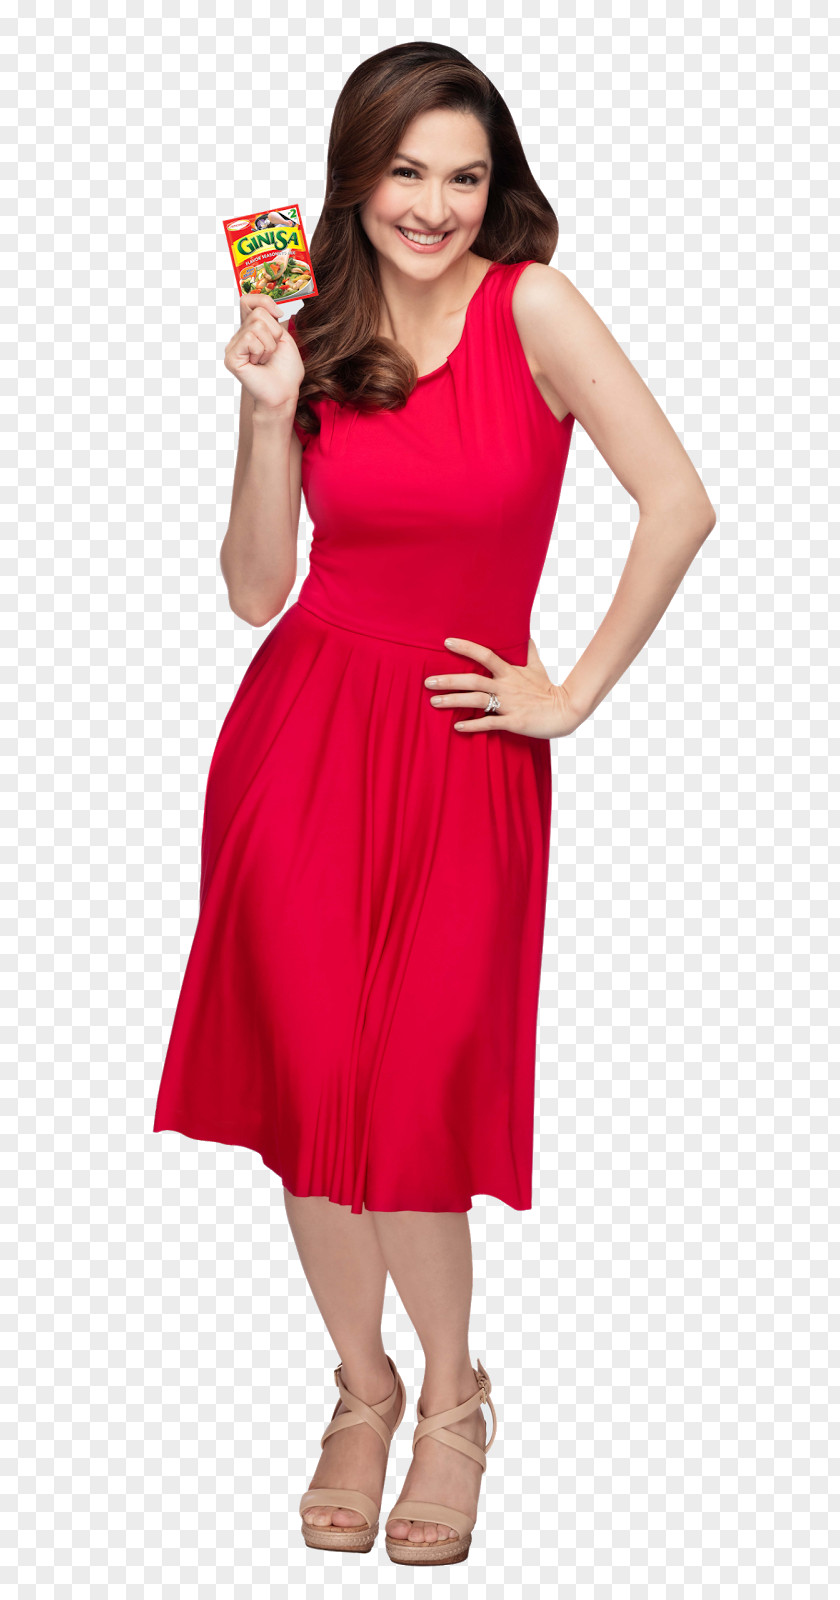 Dress Marian Rivera Costume Party Clothing PNG